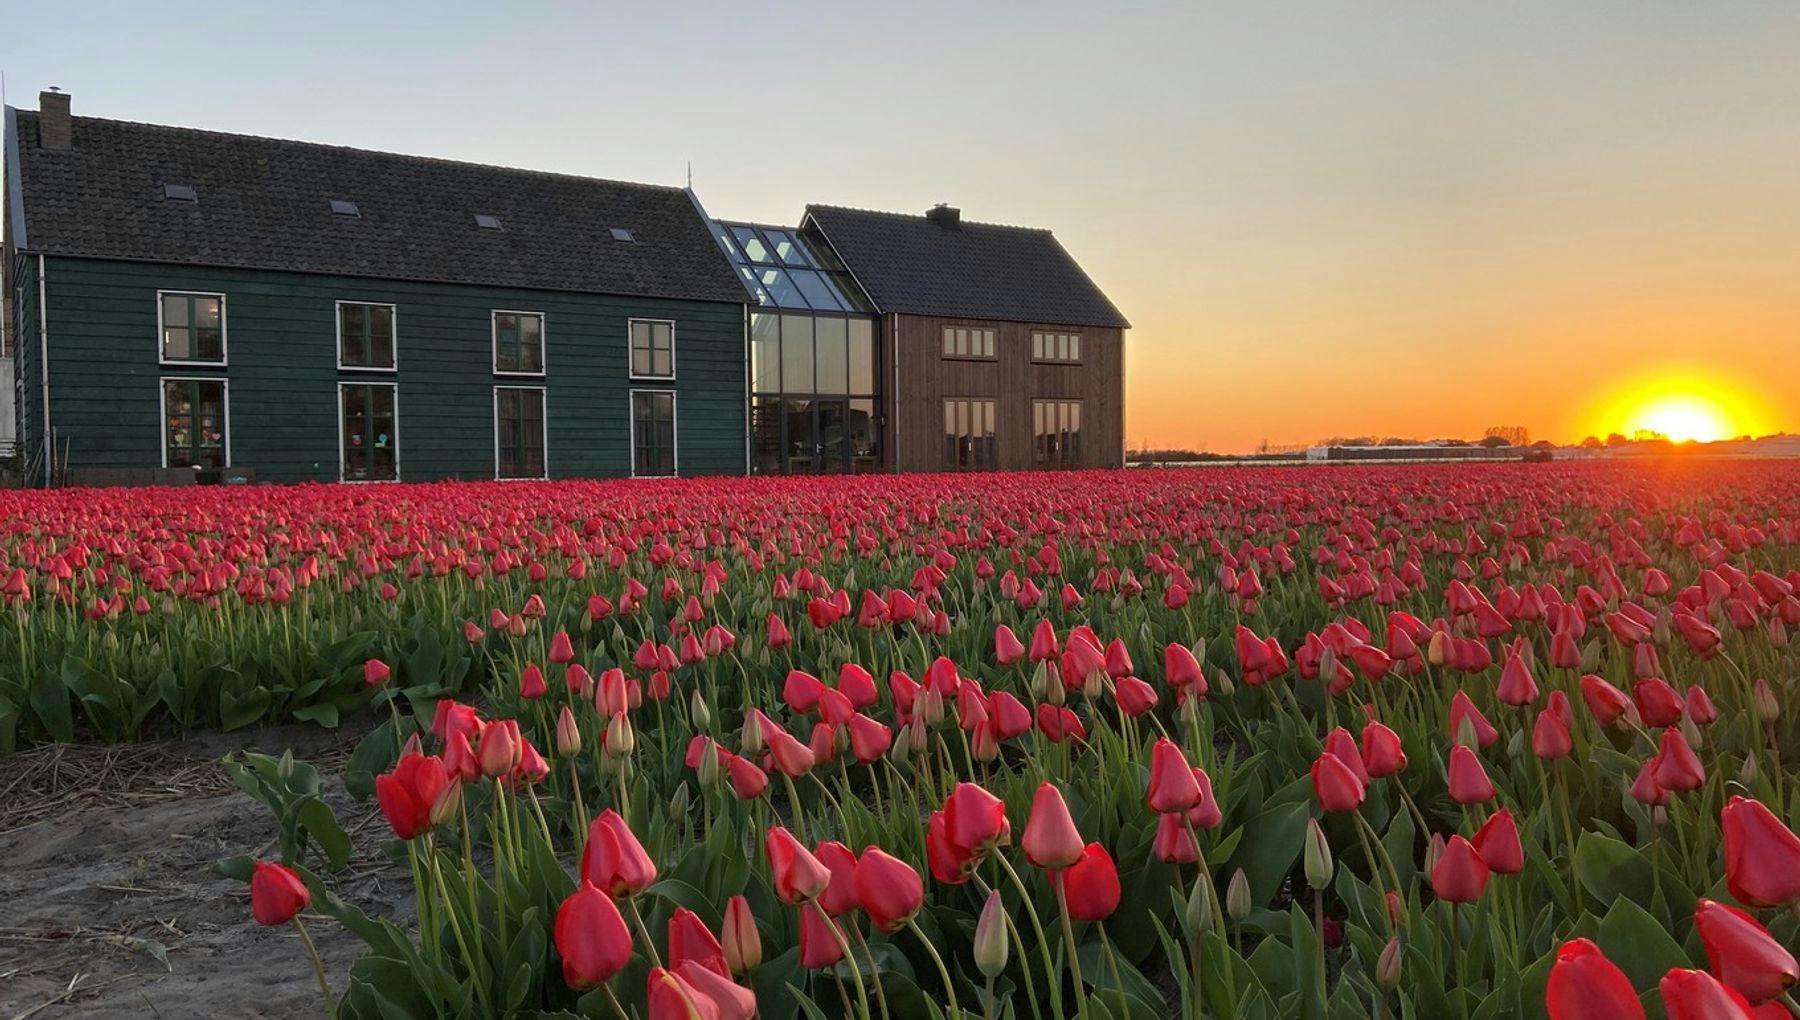 accommodation in a field of tulips